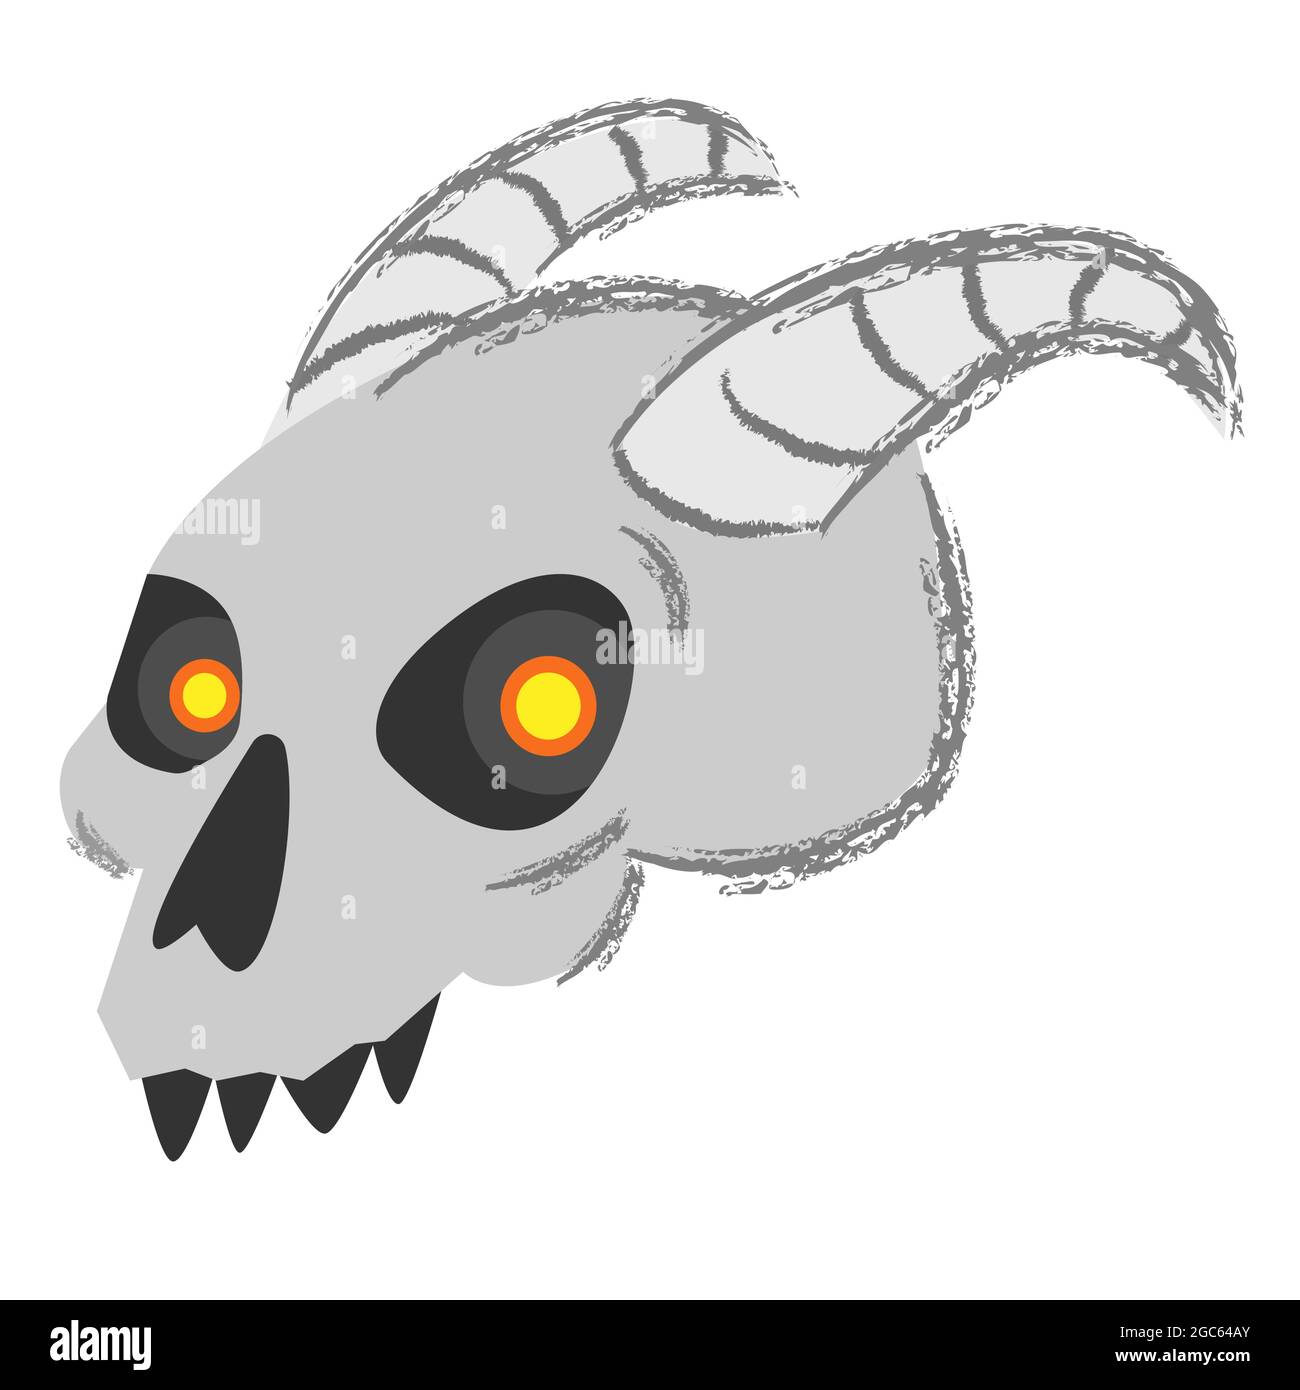 Halloween ghostly skull of the goat with glowing eye sockets. Creepy and funny cartoon vector illustration isoalted on white. Stock Vector